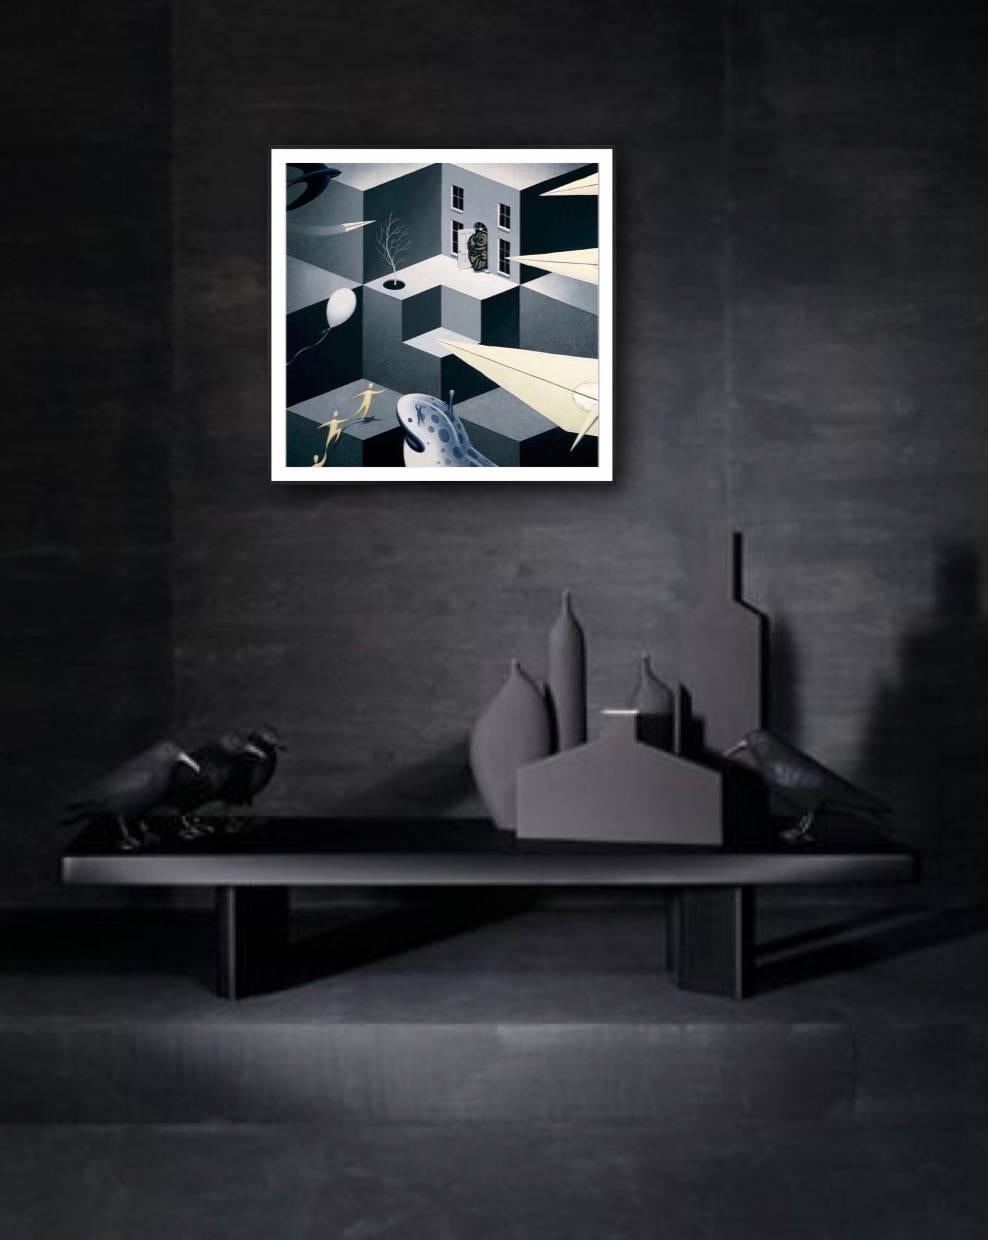 Approach, Original, Tumbling blocks subdued monochrome, Origami cranes Signed - Painting by Rupert Gatfield